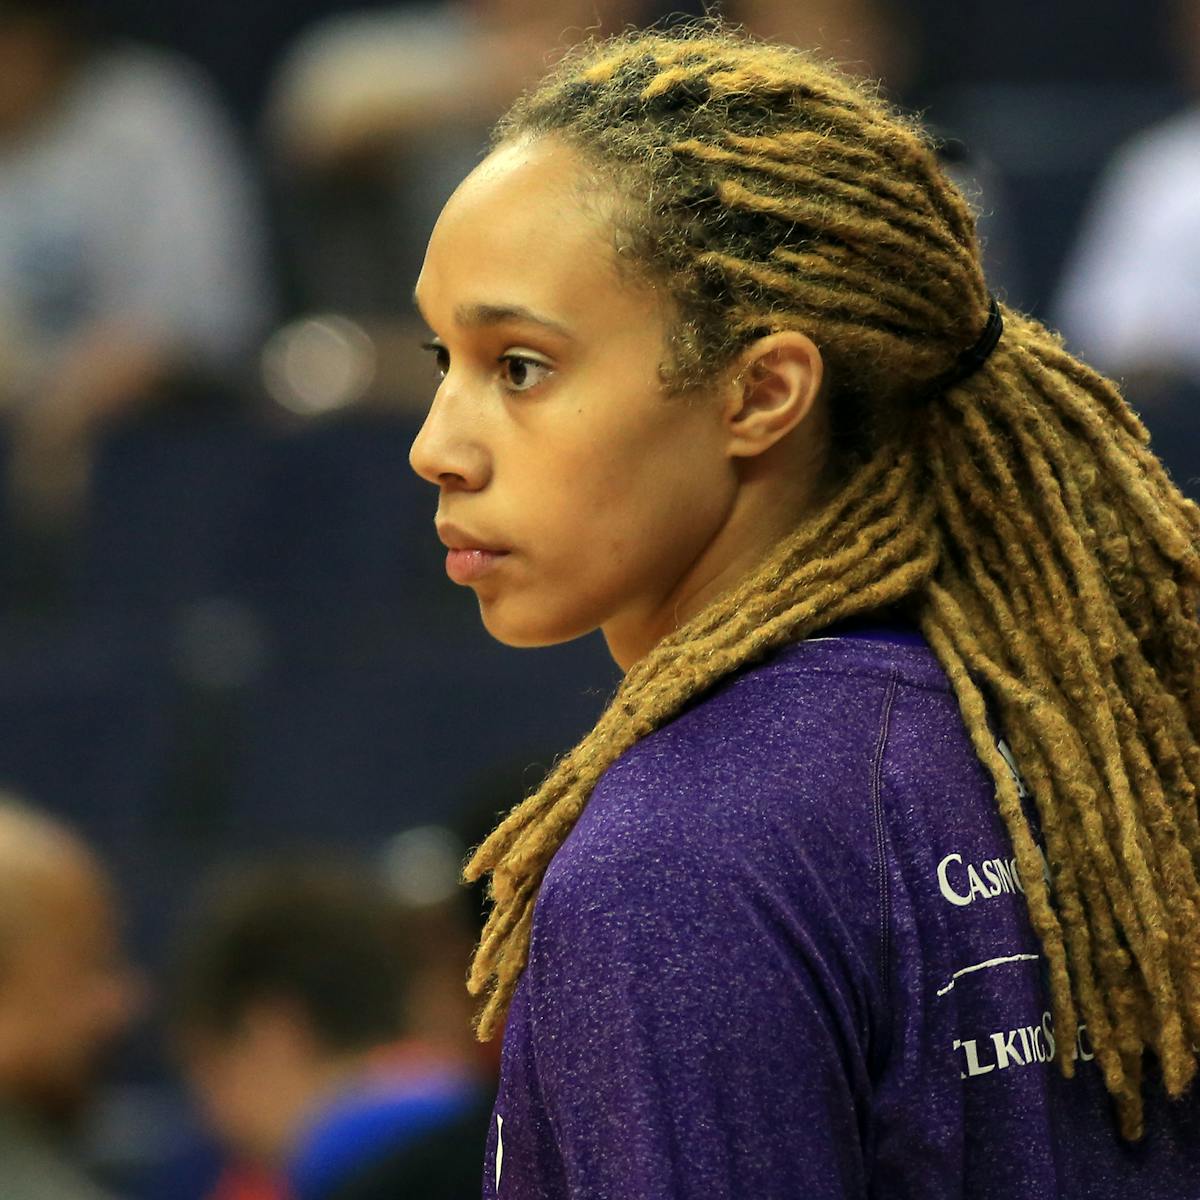 After Initial Silence The Biden Administration Is Making Moves To Free Wnba Star Brittney Griner From Russian Detention